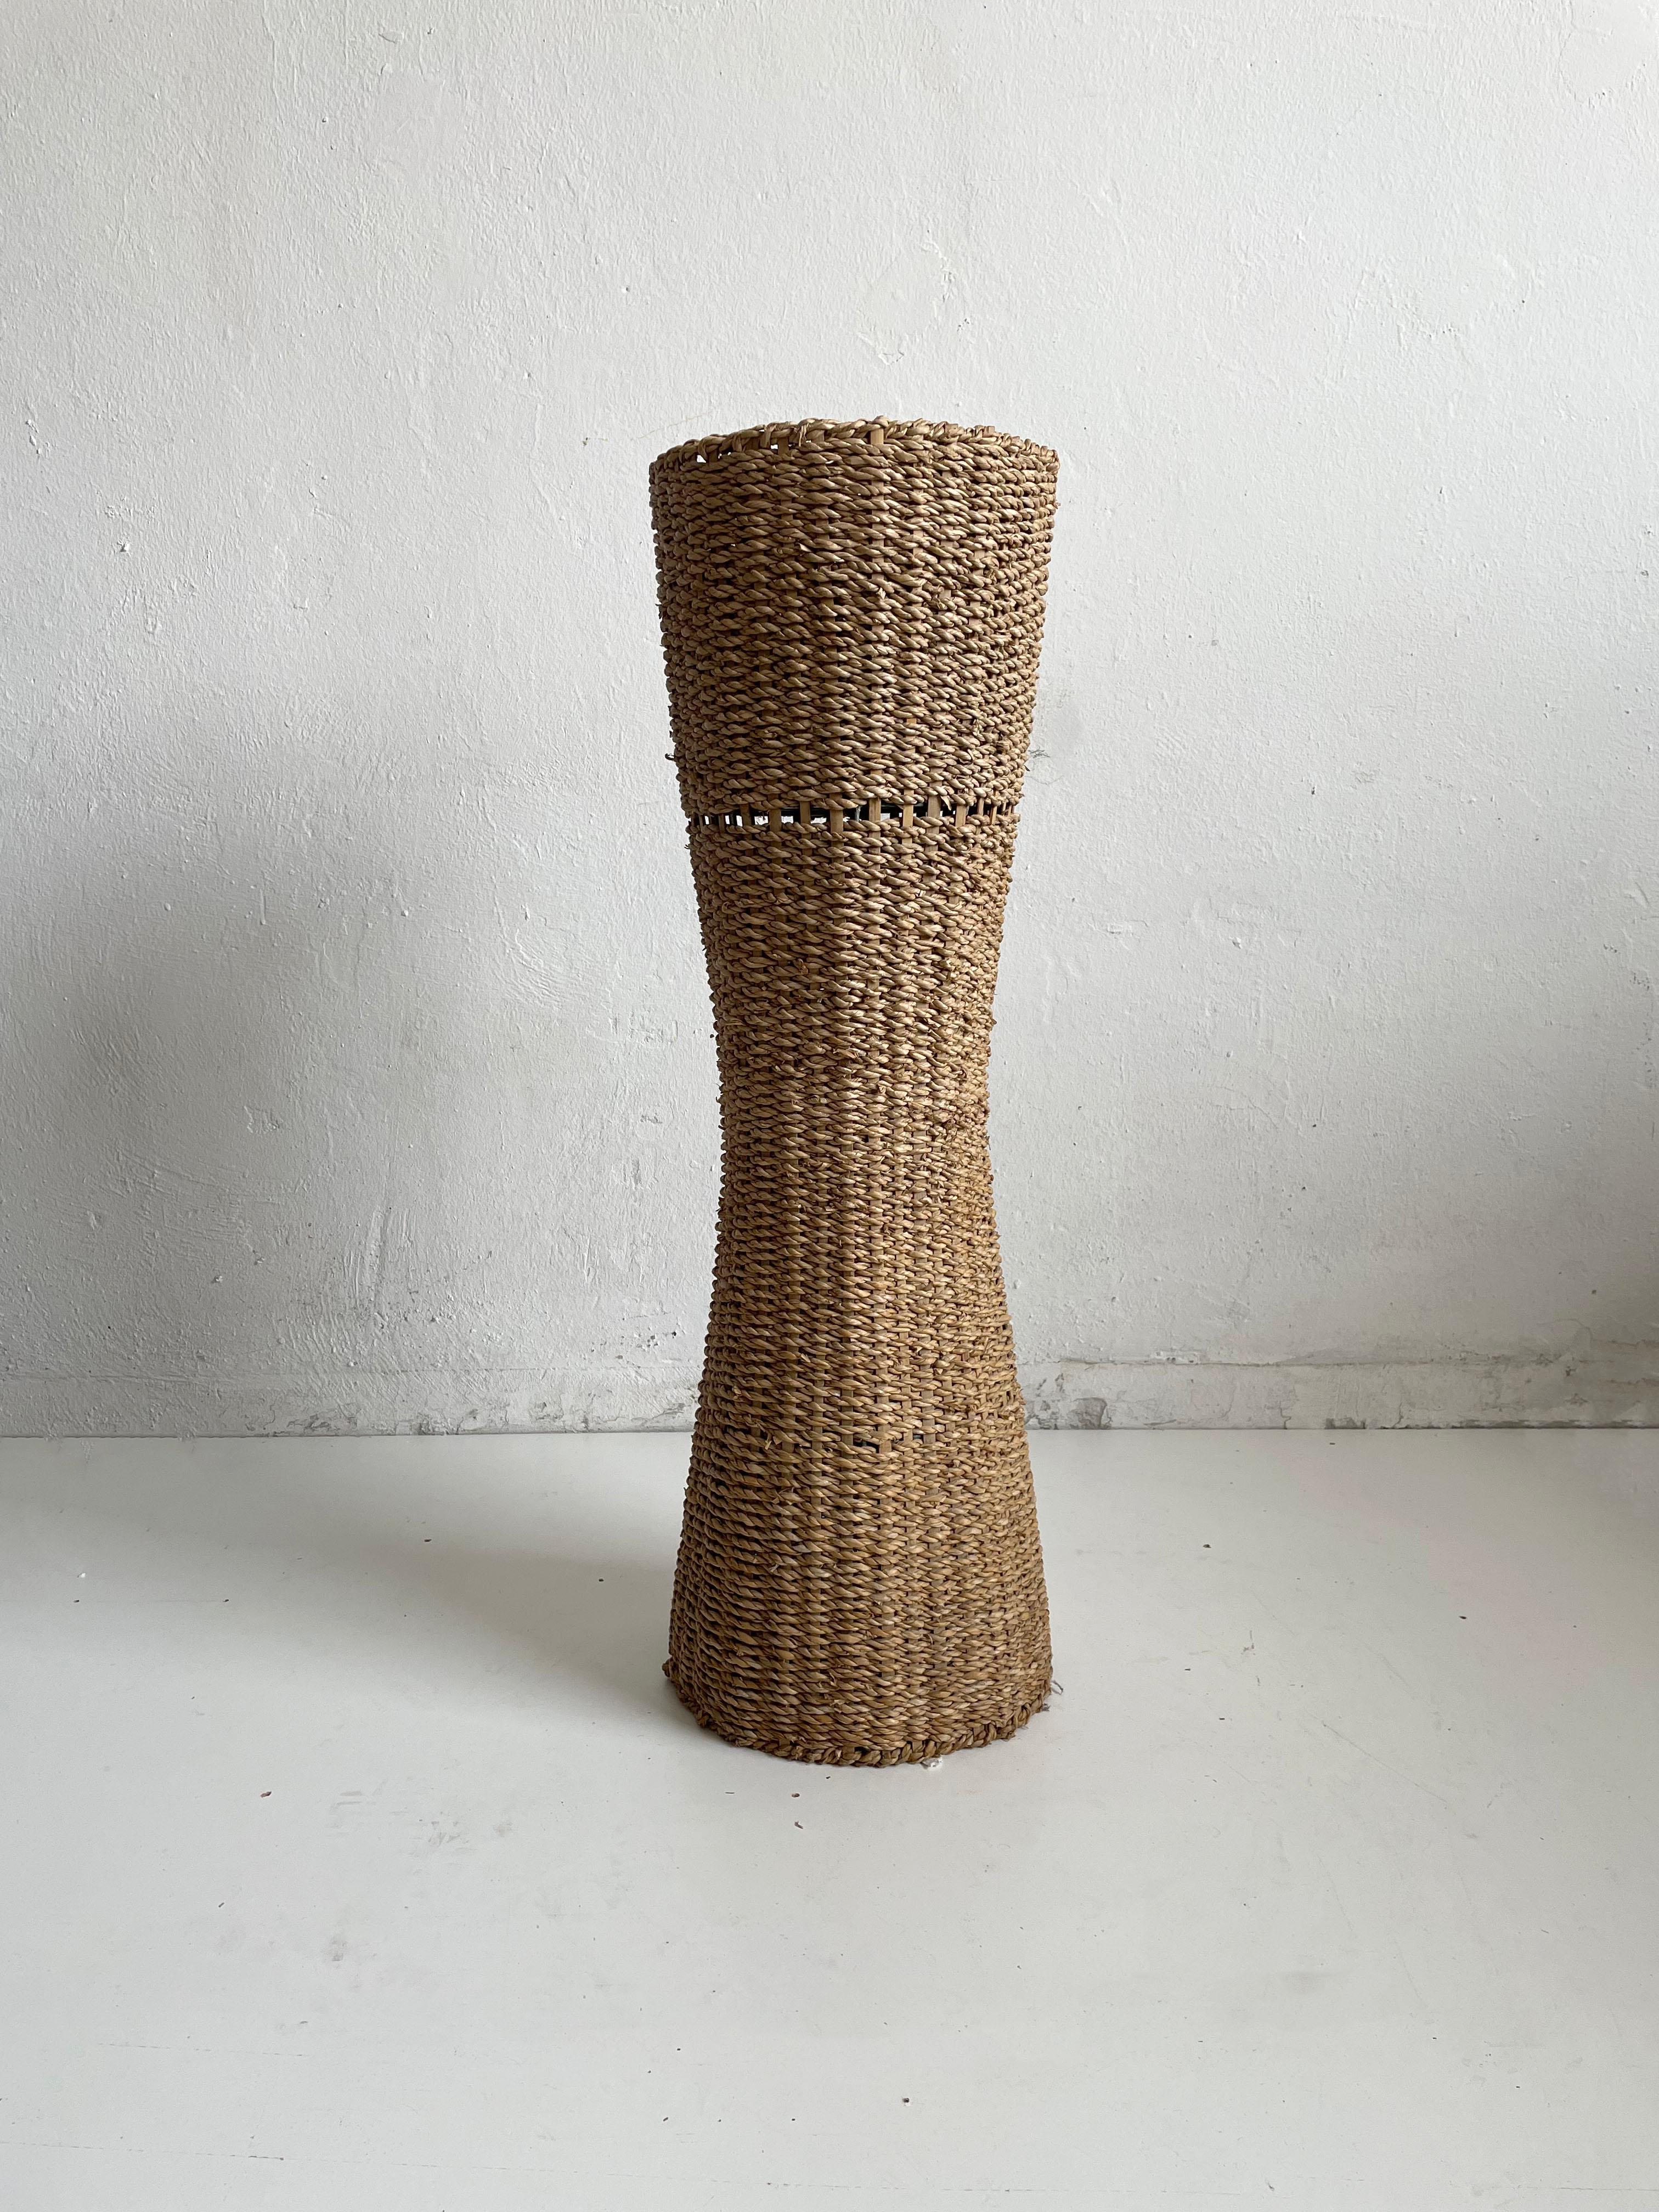 Beautiful column-shaped flower pot stand made of handwoven banana leaf, with an internal structure made of metal

Italy 1970s

Dimensions: 100 cm in height, 31 cm in diameter
the compartment for the flower pot measures: 24.5 cm is the lower